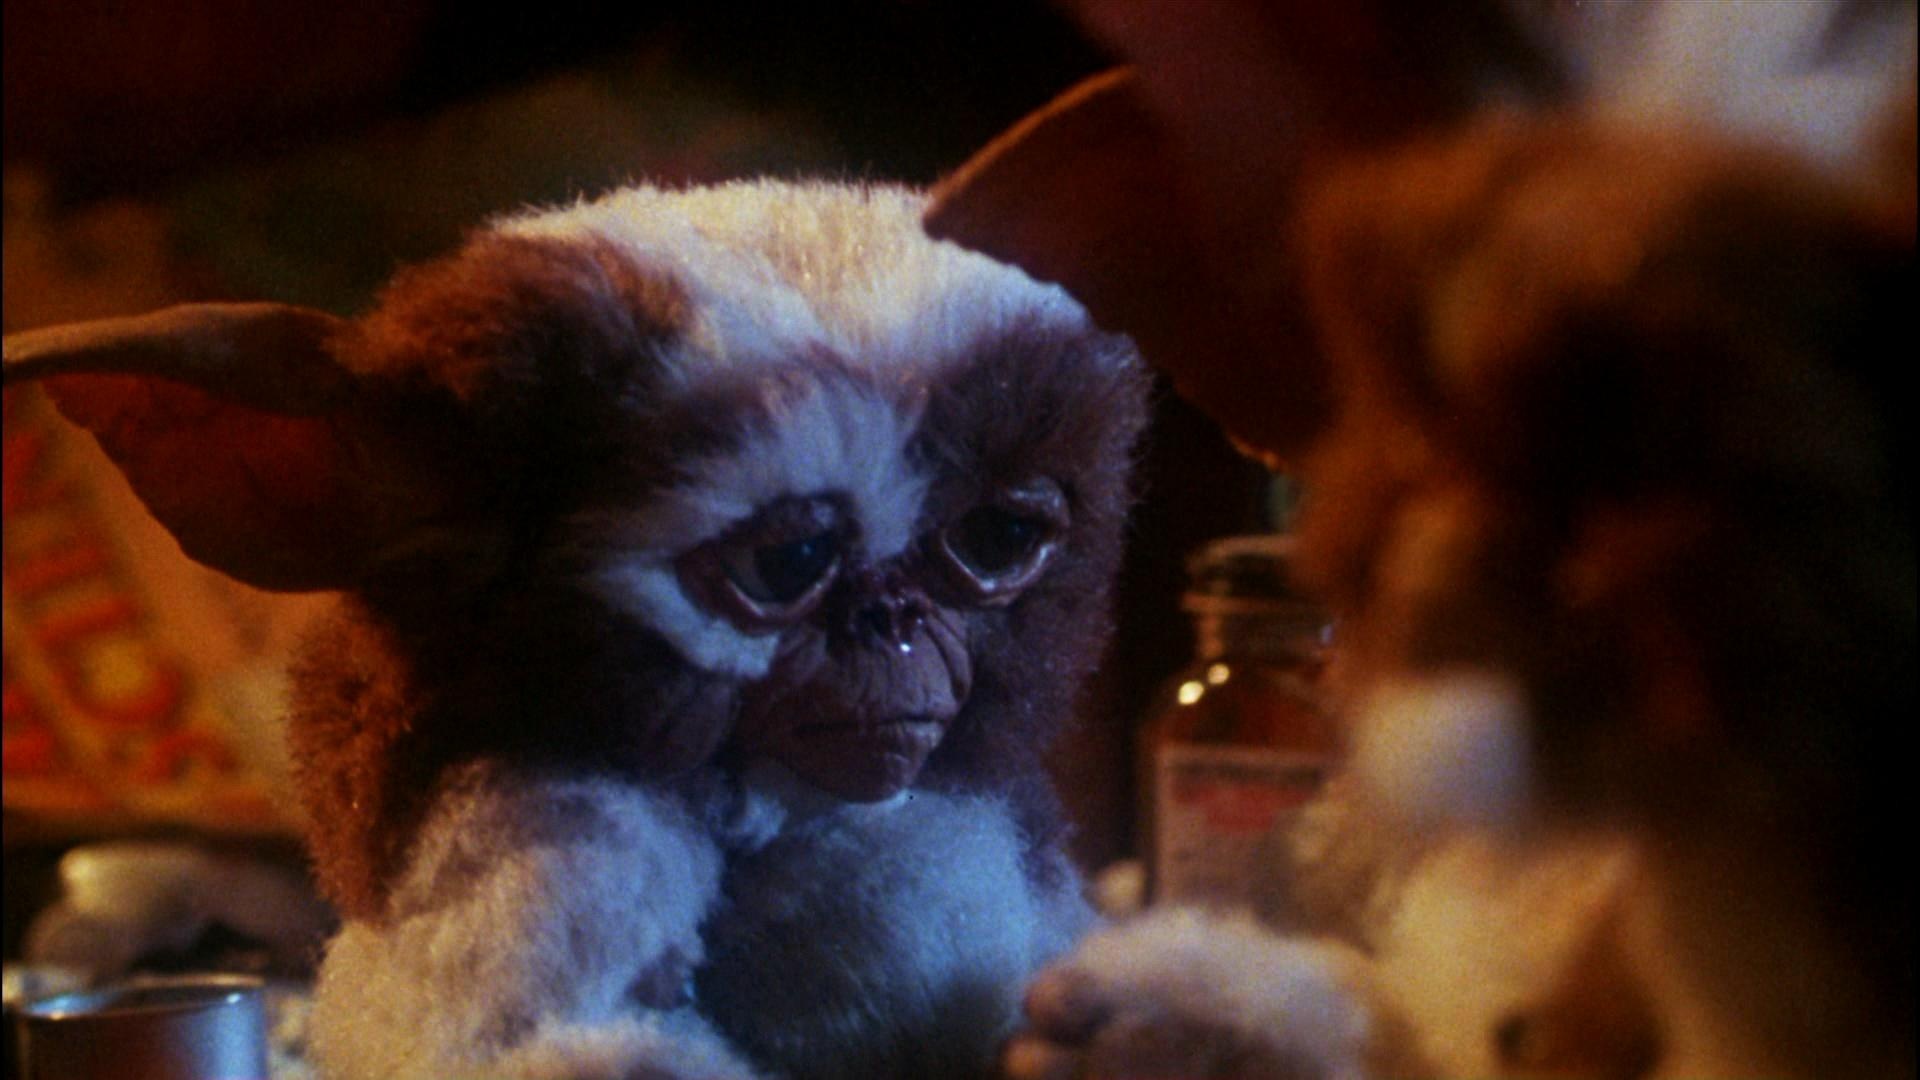 Gremlin Gizmo: Bright light can cause physical harm to the creature. 1920x1080 Full HD Wallpaper.